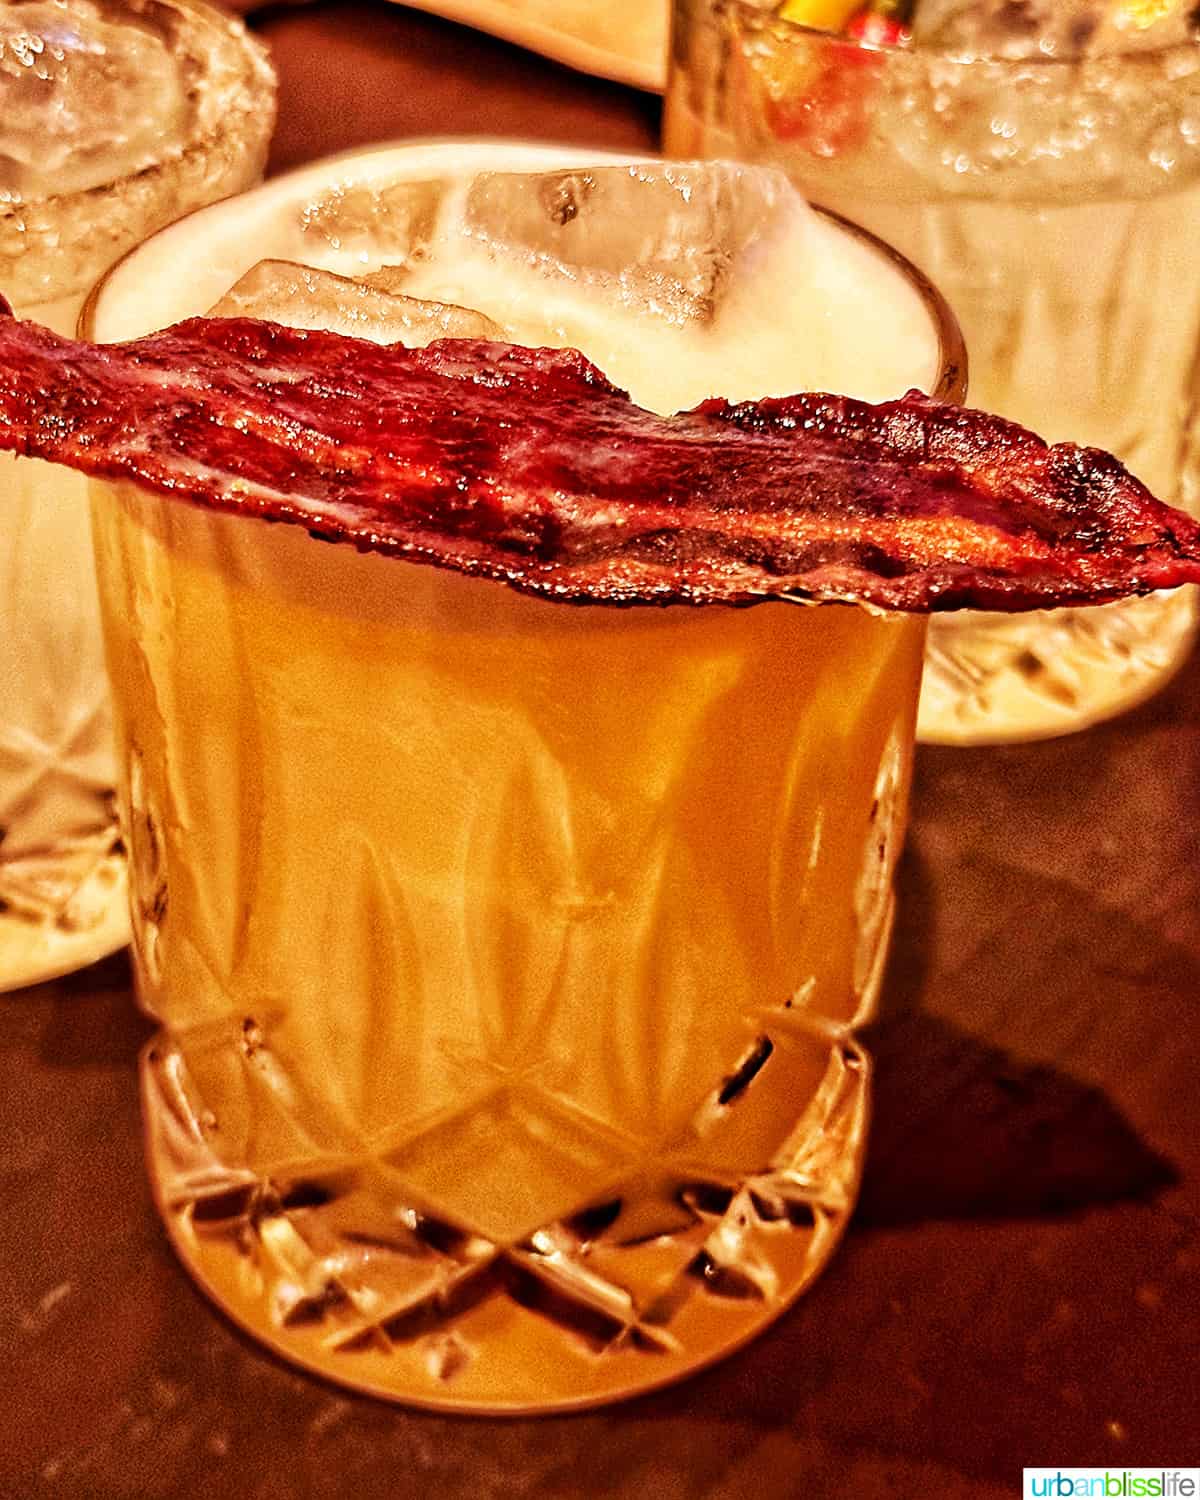 Oso Sour cocktail at Bar Oso restaurant in Whistler BC Canada.